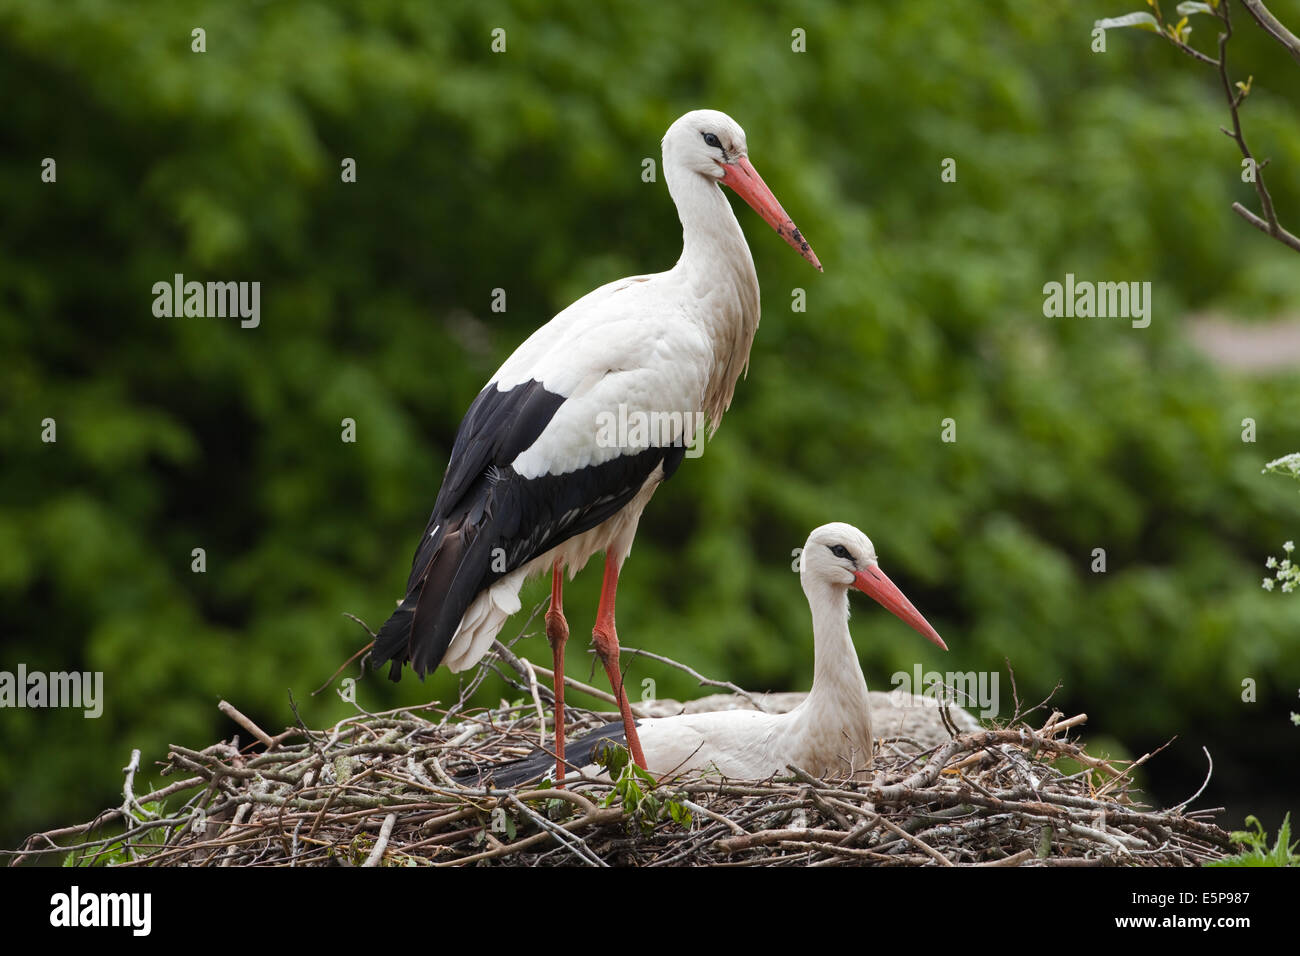 White Stork (Ciconia ciconia). Breeding pair, female sitting on nest. Note recent addition of green foliage on nest rim. Stock Photo